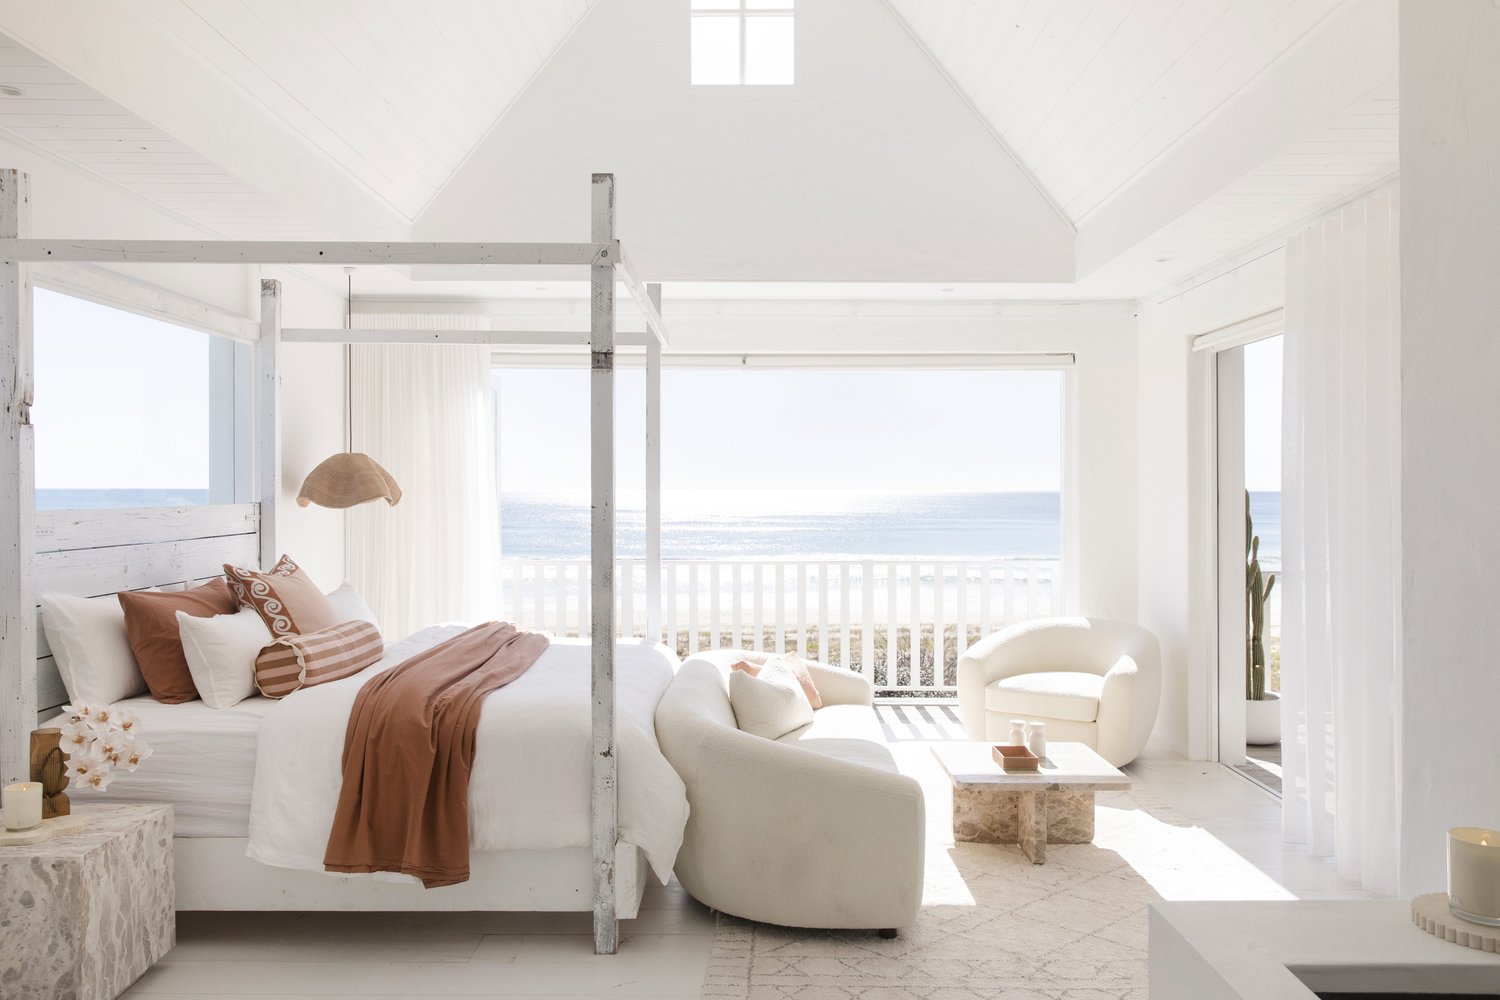 Bedroom canopy bed beach house australia rolling cheese white decor